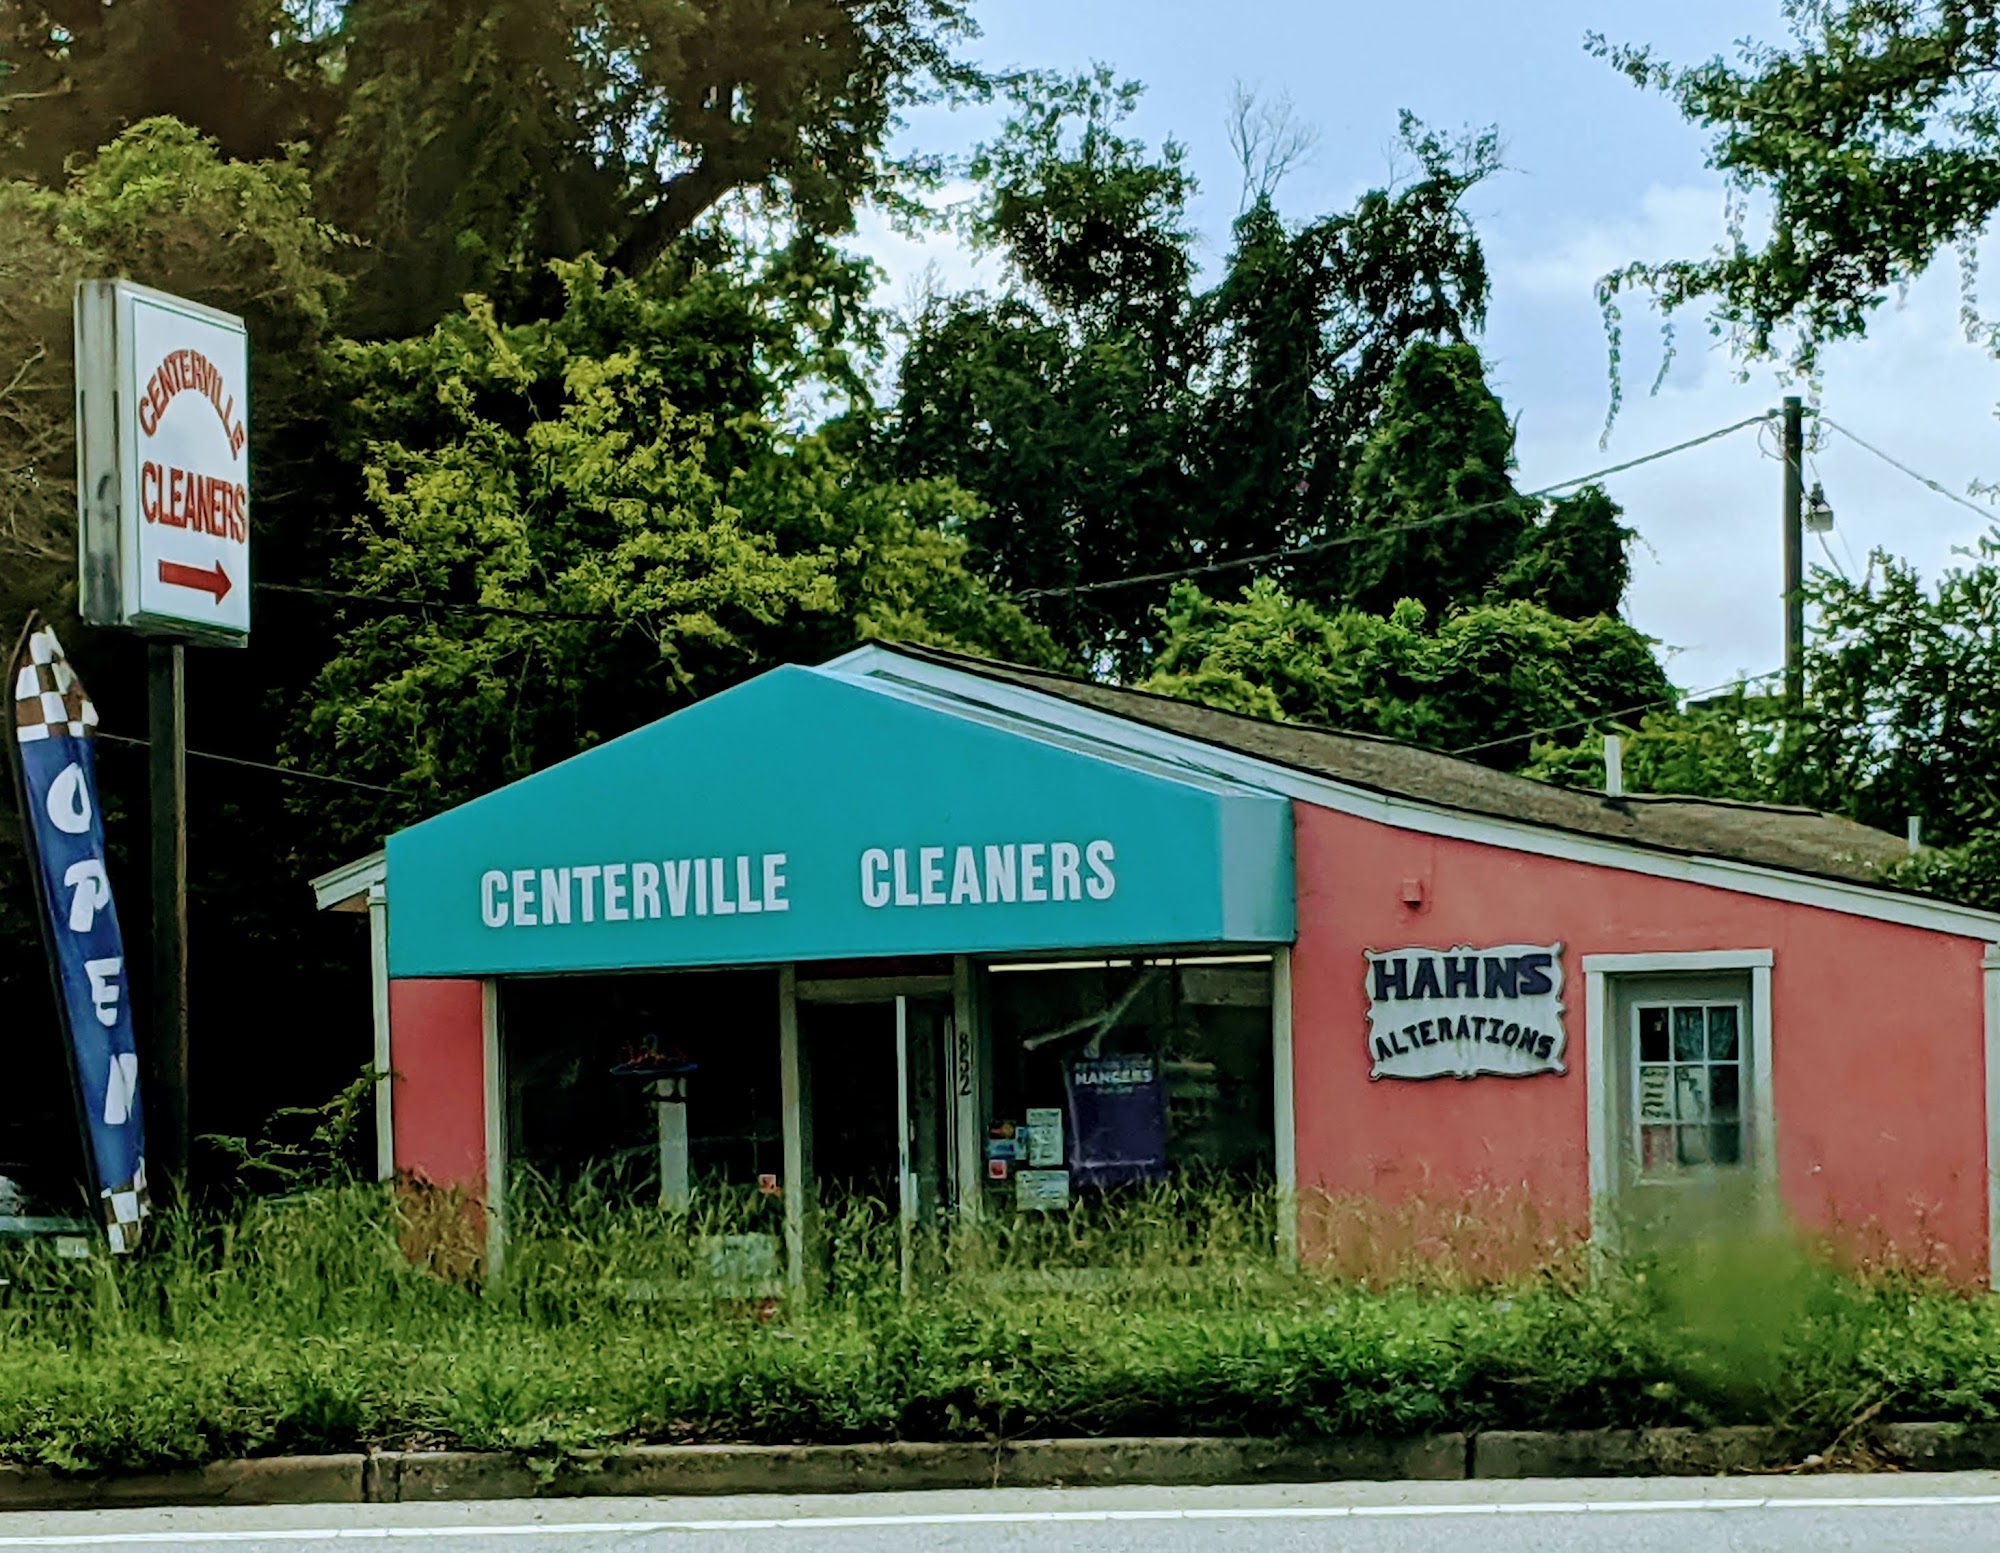 Centerville Cleaners 852 Folly Rd, James Island South Carolina 29412